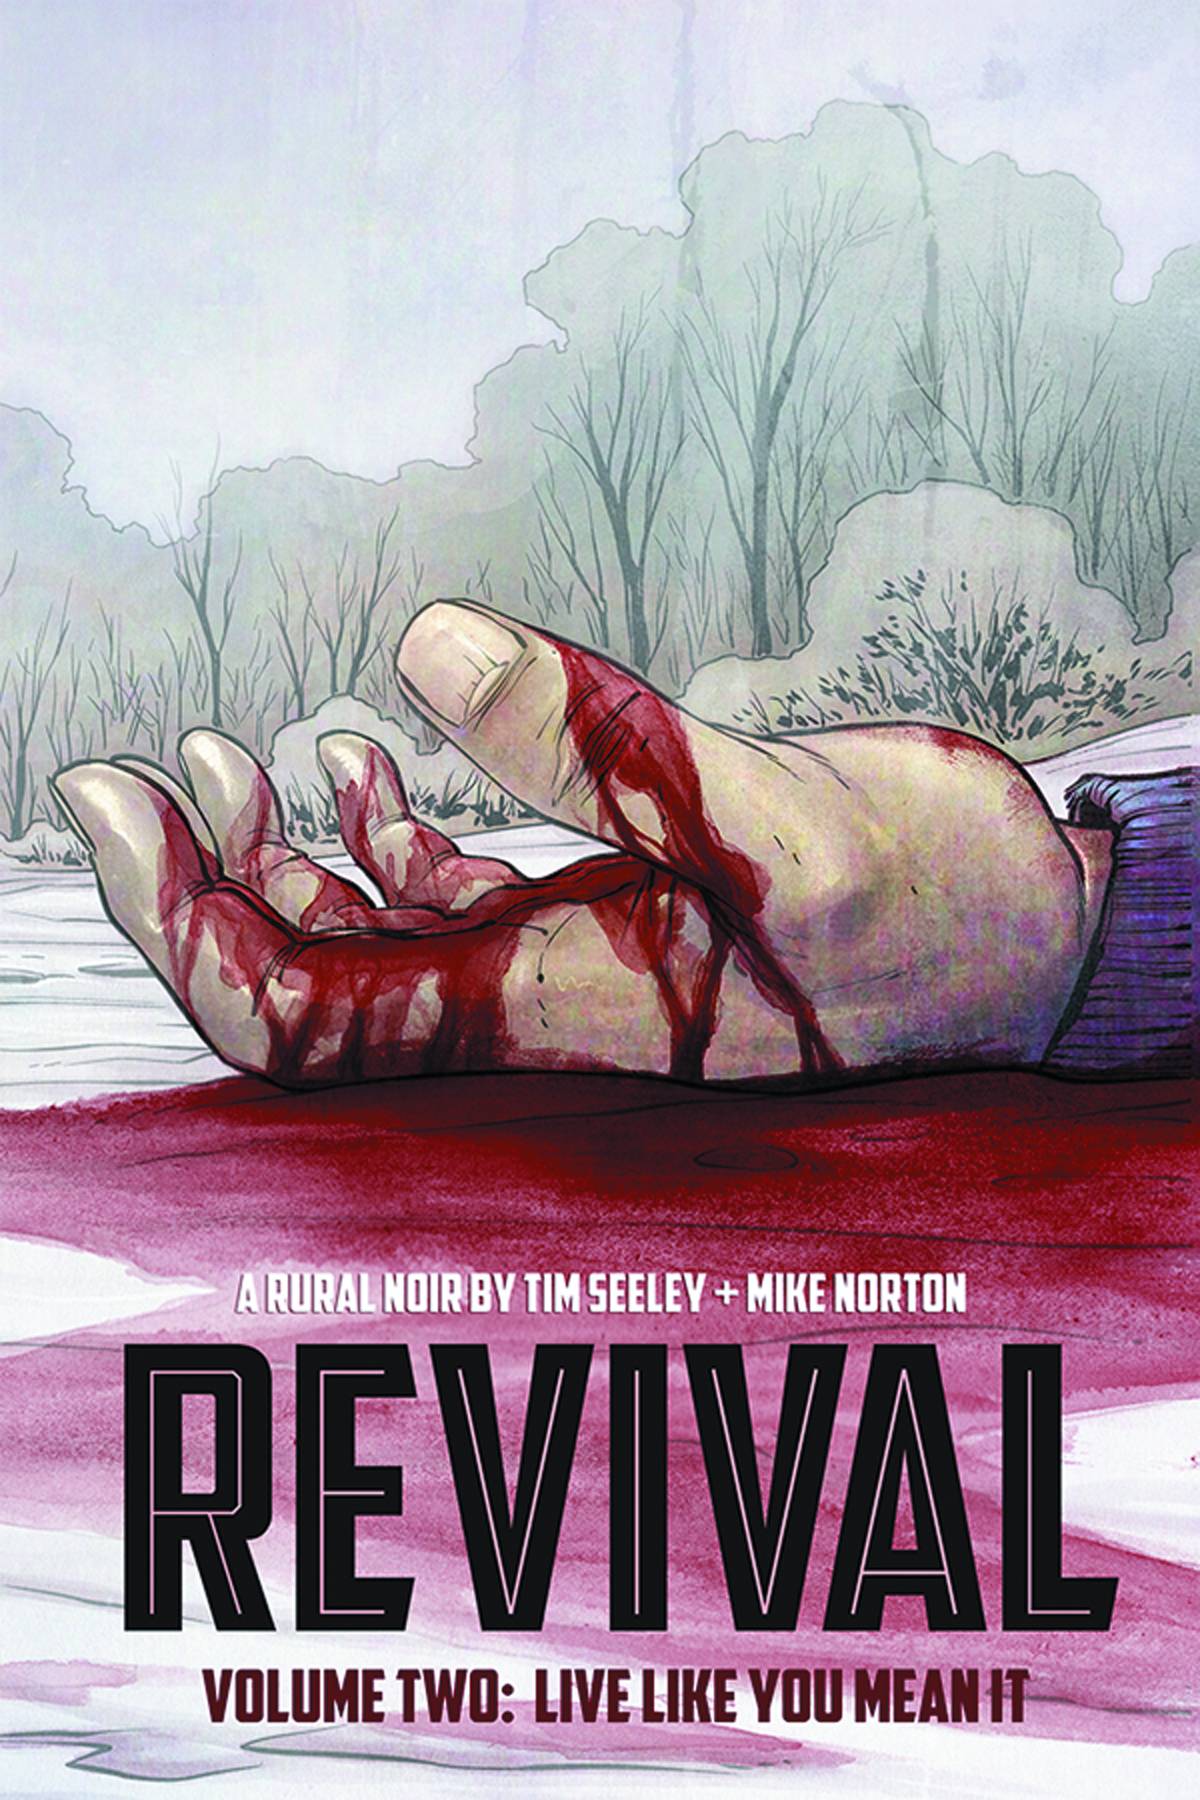 REVIVAL TP VOL 02 LIVE LIKE YOU MEAN IT (MAY130431)